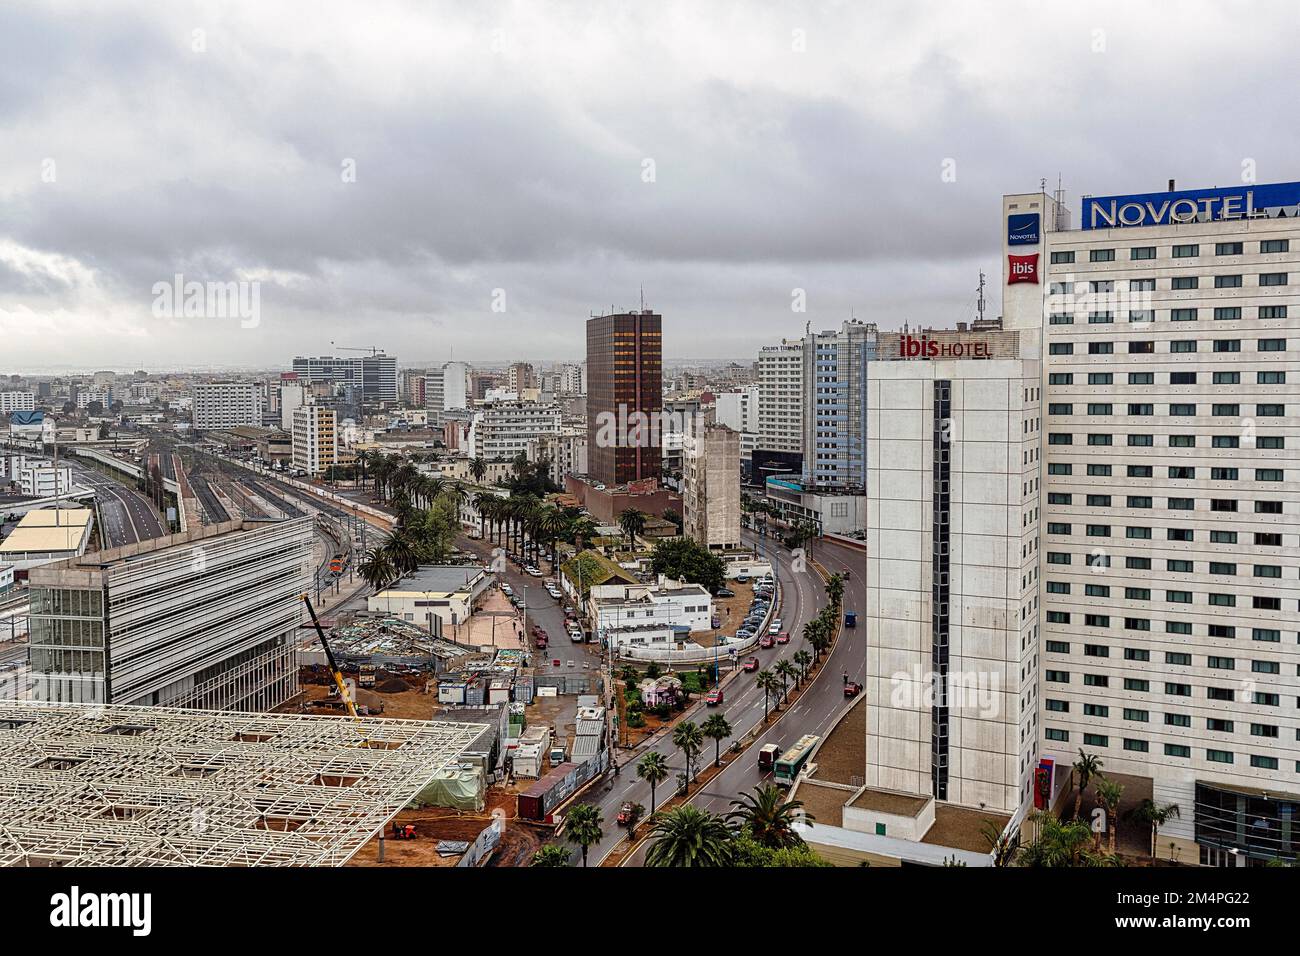 View from above of hotels and skyscrapers, dreary weather, Casablanca, Morocco Stock Photo